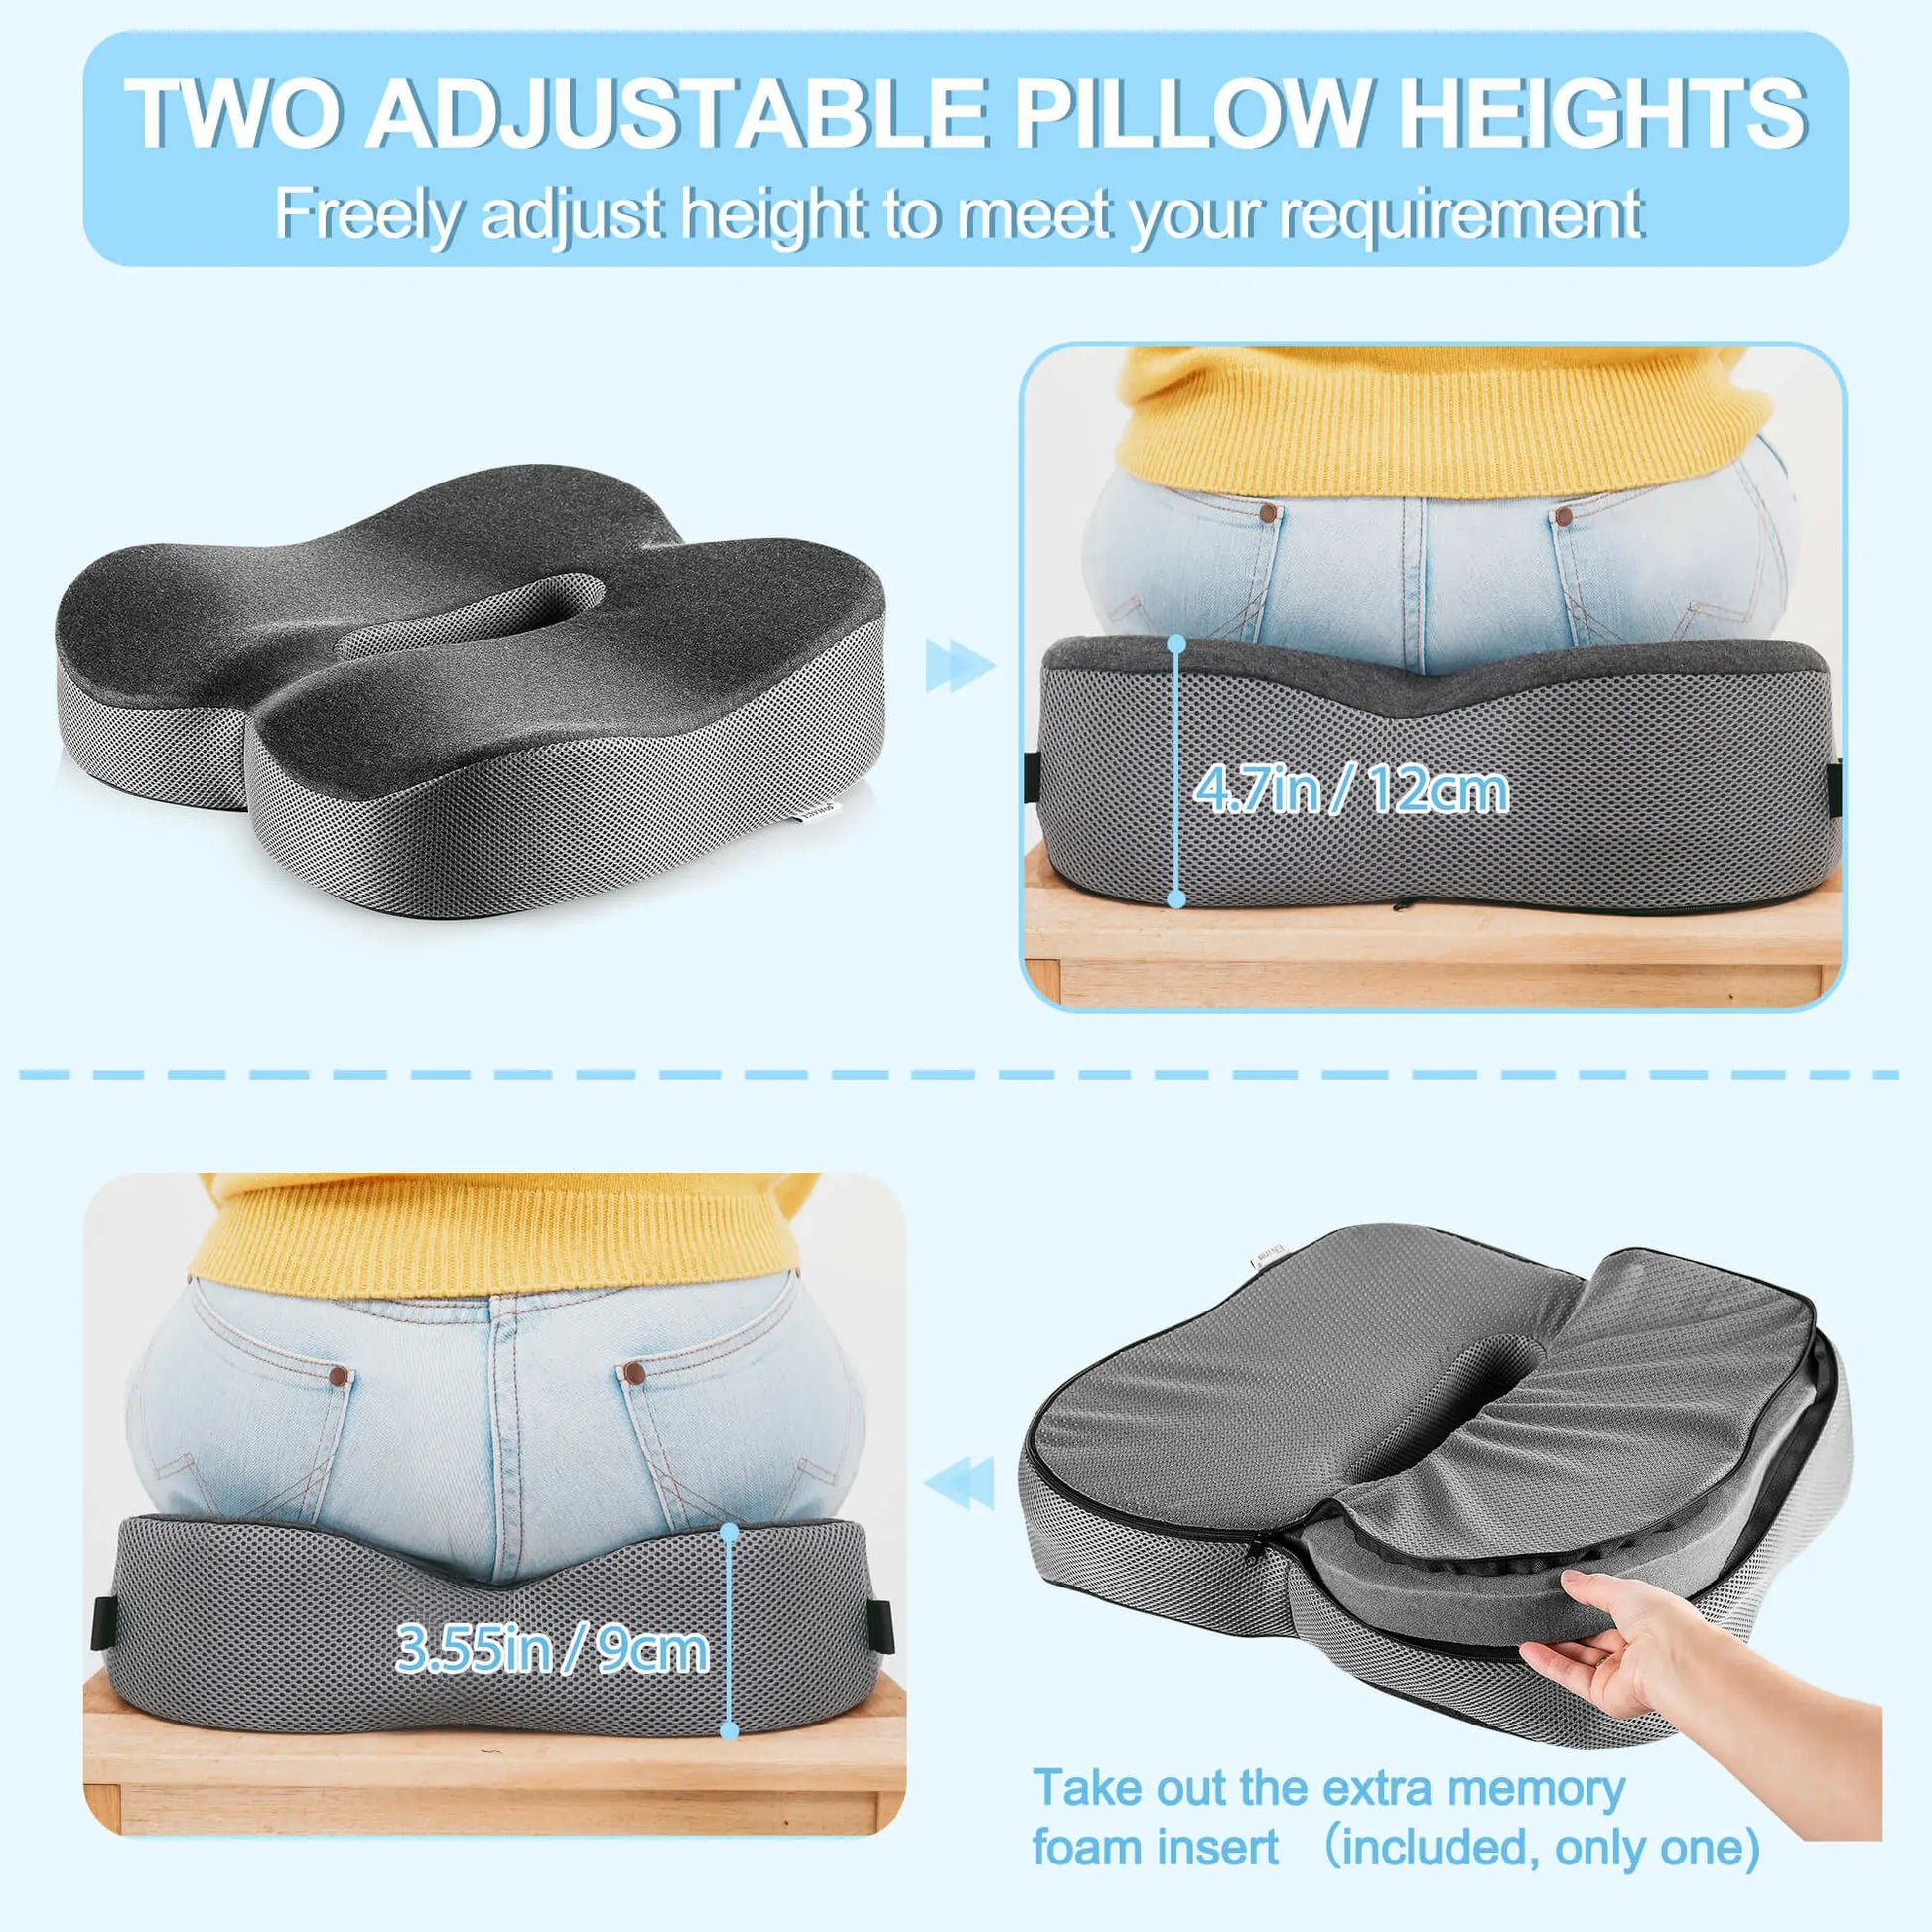 Butt Pillow for Tailbone, Office Chair Cushions for Back and Butt Increases  Seating Comfort, Foam Cushion Pads for Long Sitting Hours on